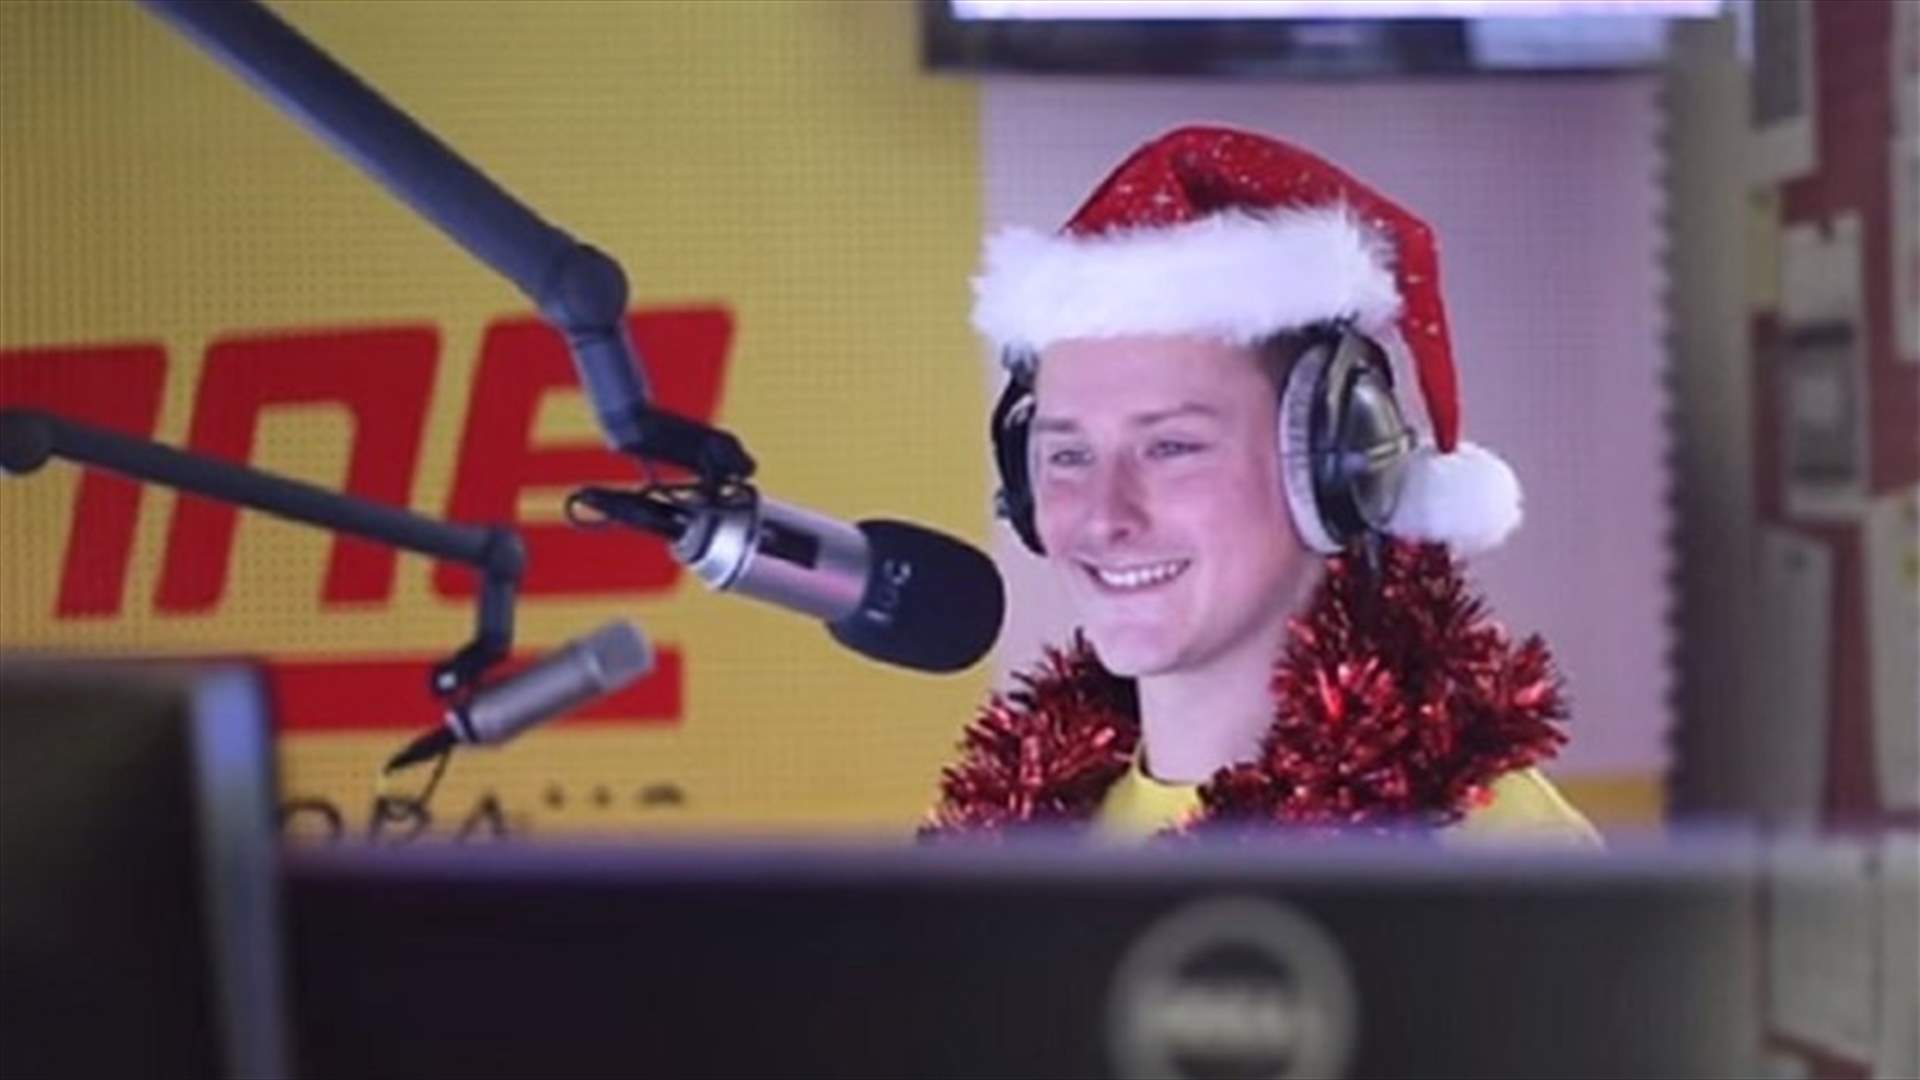 REPORT: Radio station punishes DJ who played “Last Christmas” 24 times